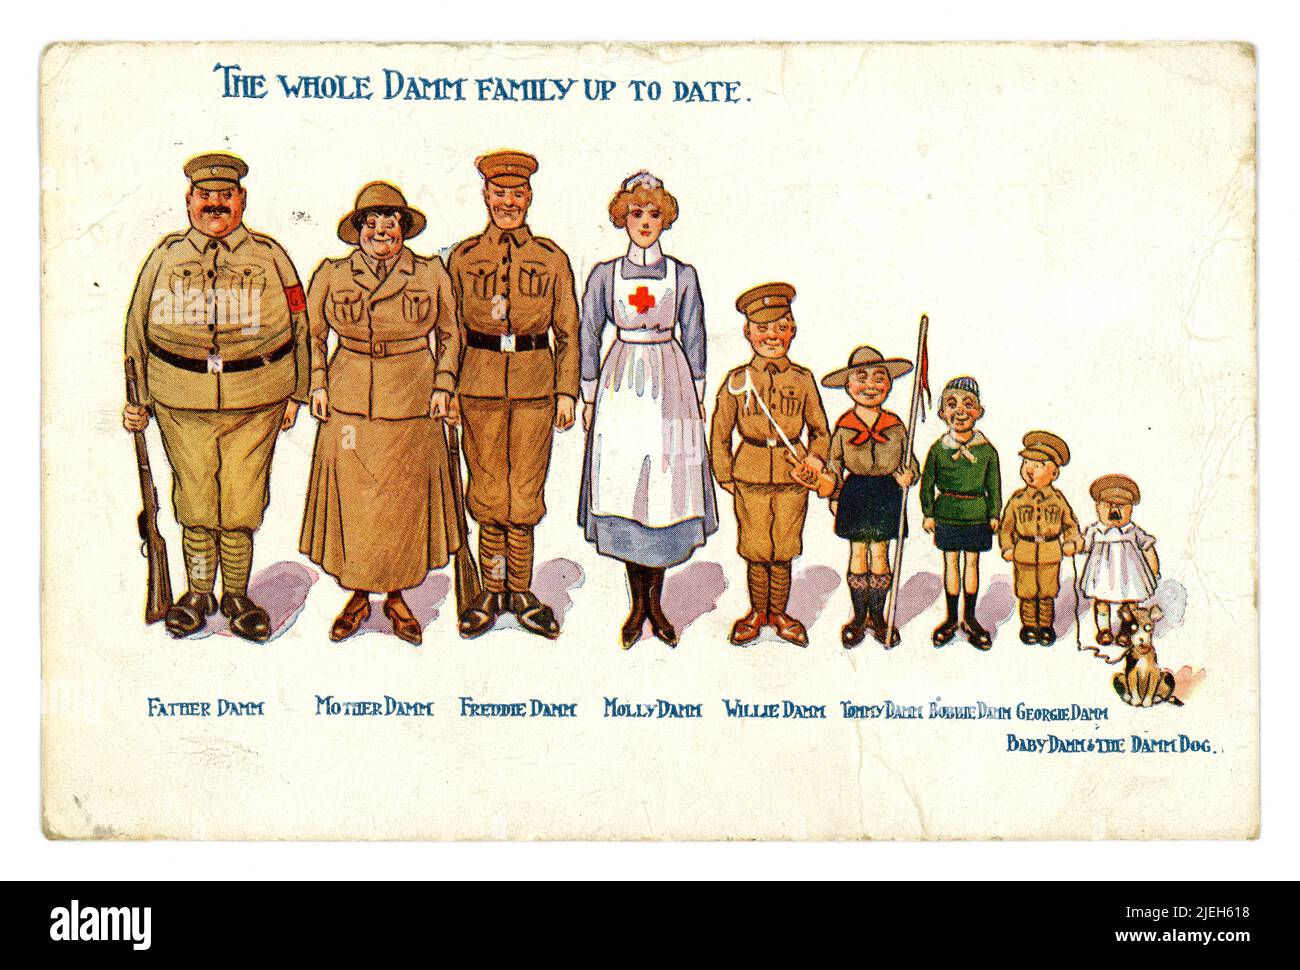 Original illustrated comic cartoon postcard The Whole Damm Family Up to Date. Illustrates how the whole family (and large) were doing their bit for the war effort - the men are soldiers, the older girl is a red cross nurse and the mother is in the Women's Army Auxiliary Corps (WAAC), one teenage boy is possibly in the boy's brigade, the kids are scouts and the youngsters are dressed as soldiers. The baby is wailing...there is also a family dog. The Regent Publishing Co. London, dated/ posted June 1918. Stock Photo